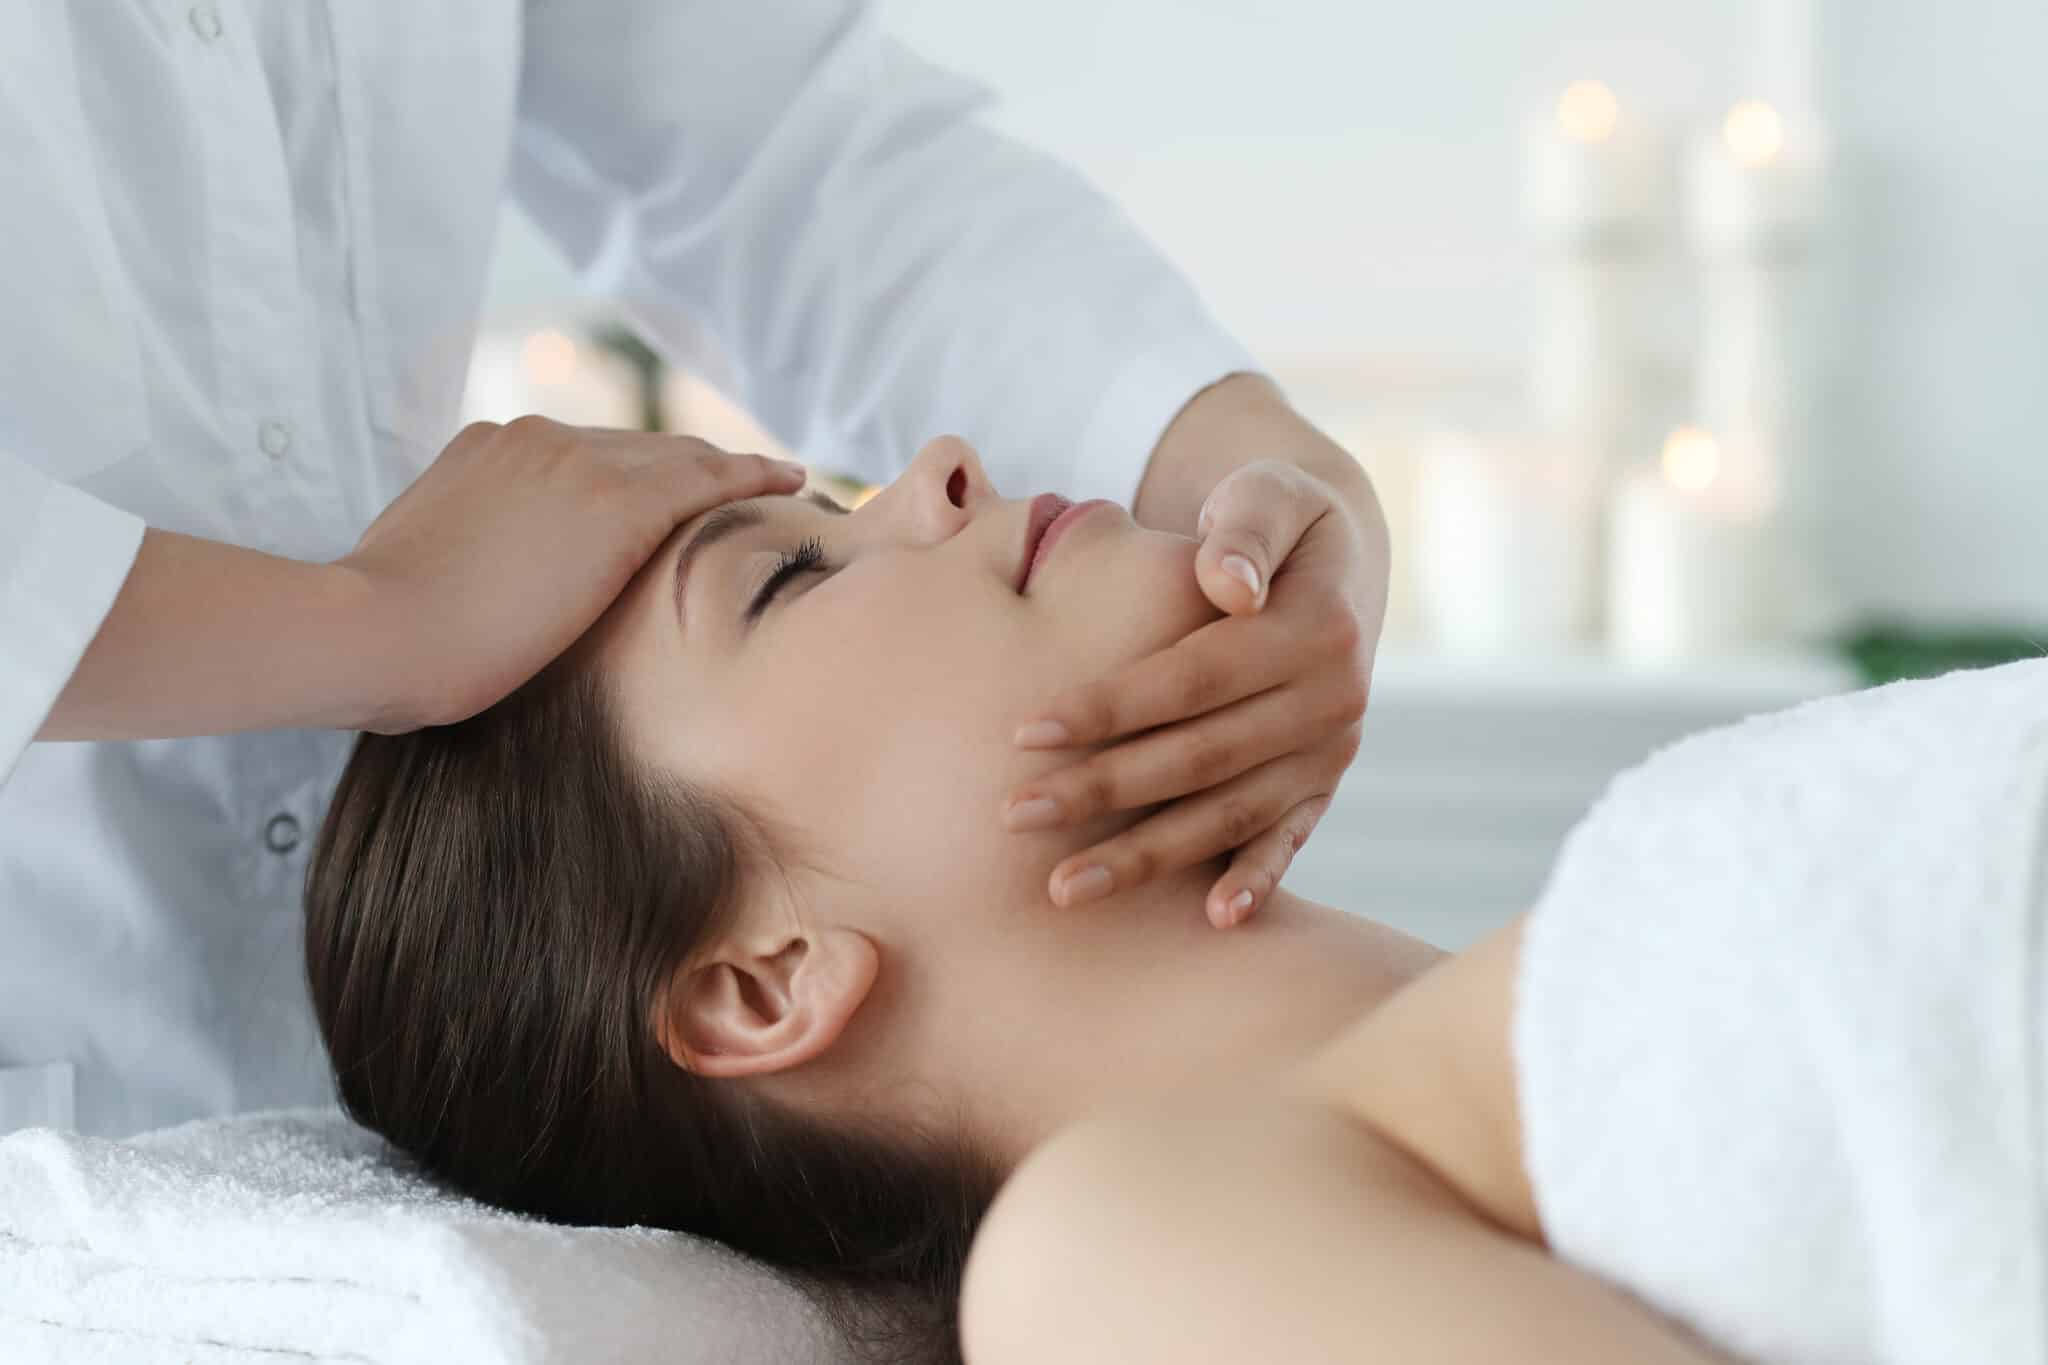 Beauty and healthcare. Woman in spa salon